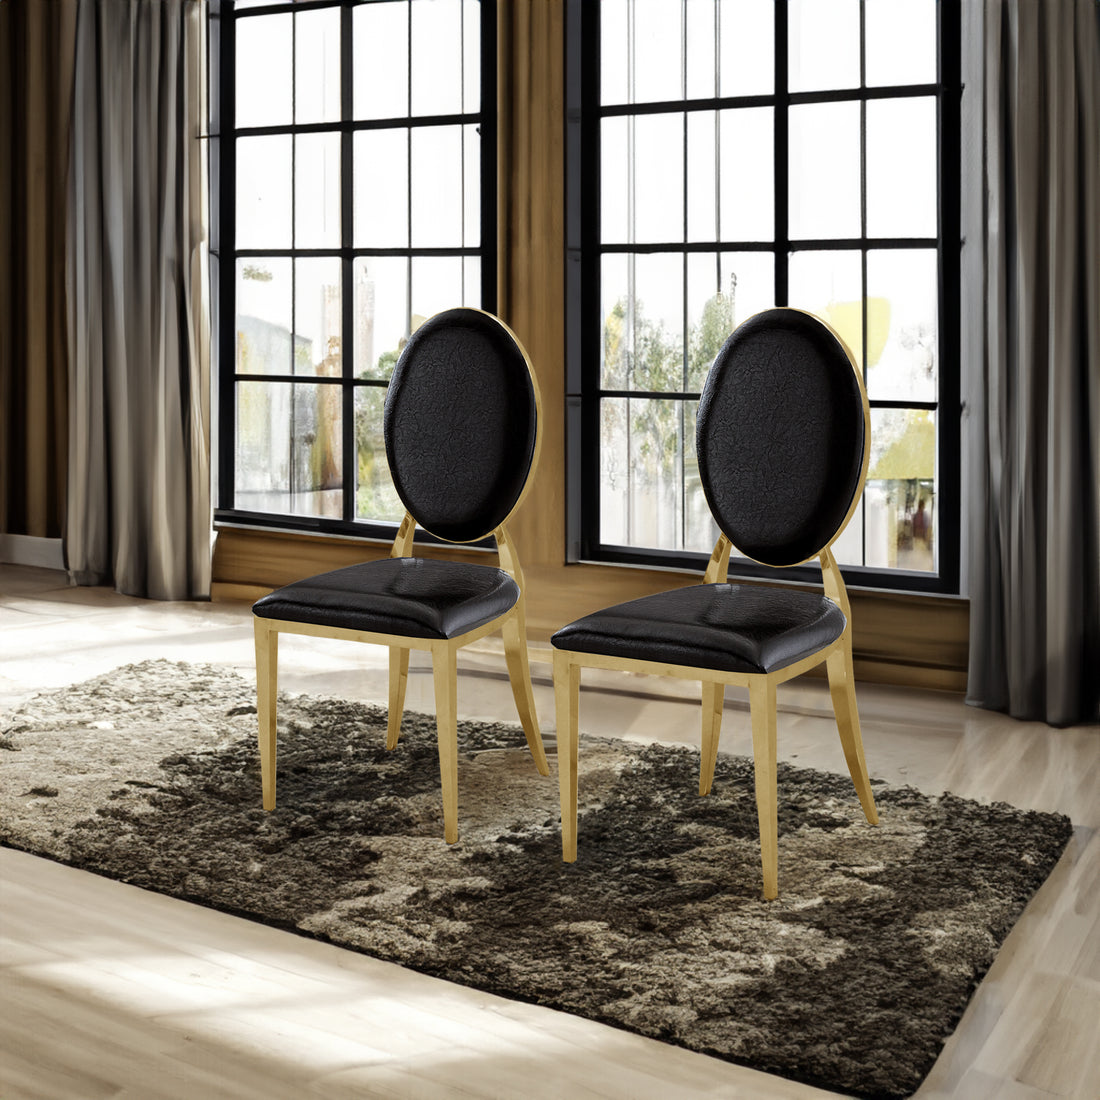 Dining Chair Set Of 2, Oval Backrest Design And -